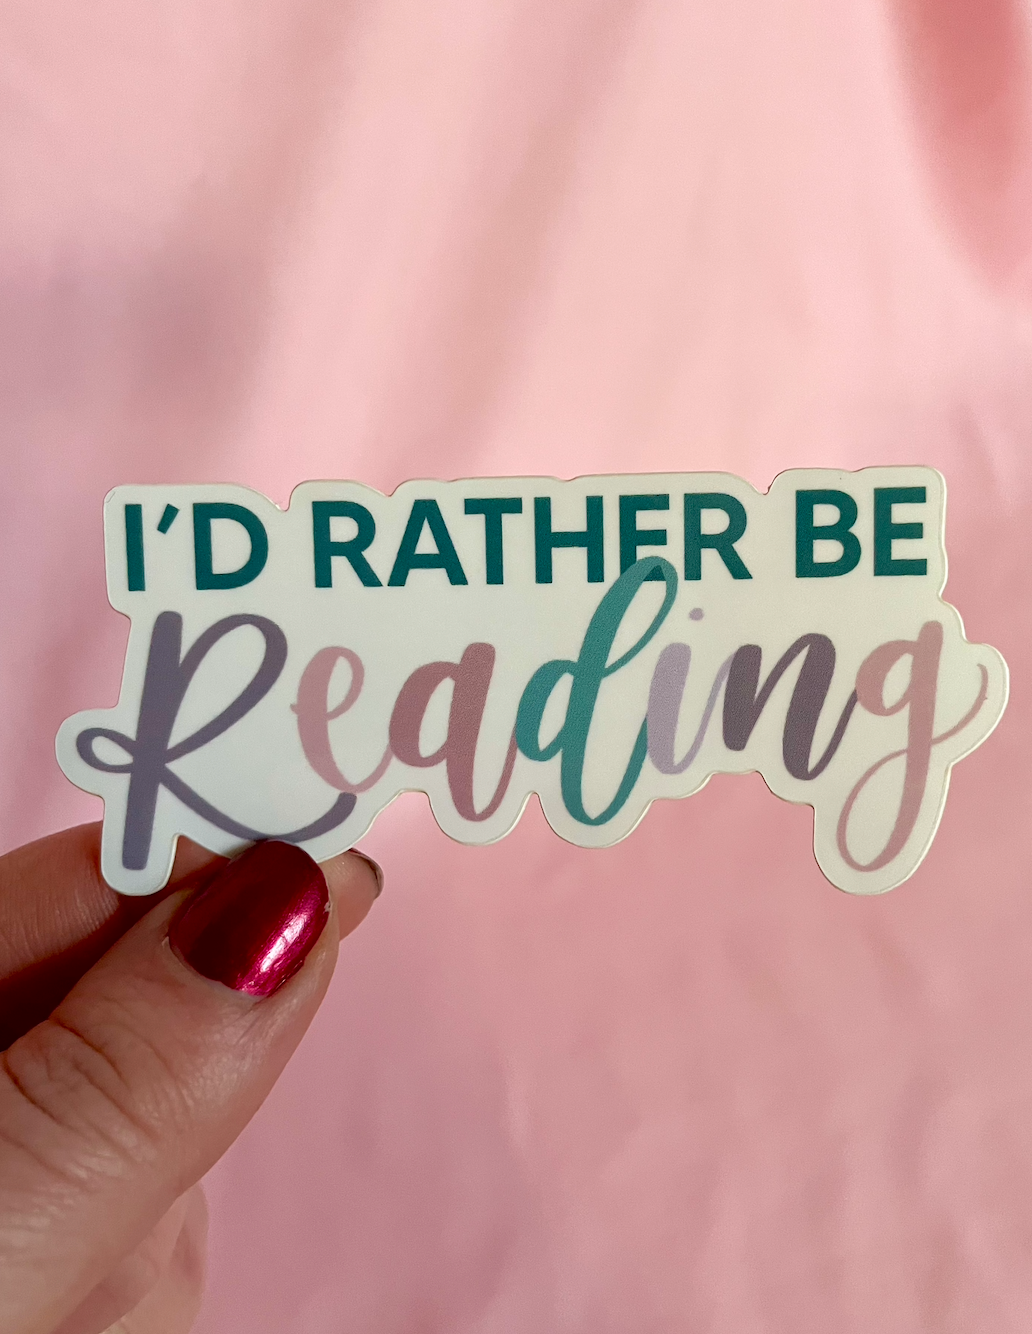 Rather Be Reading Sticker